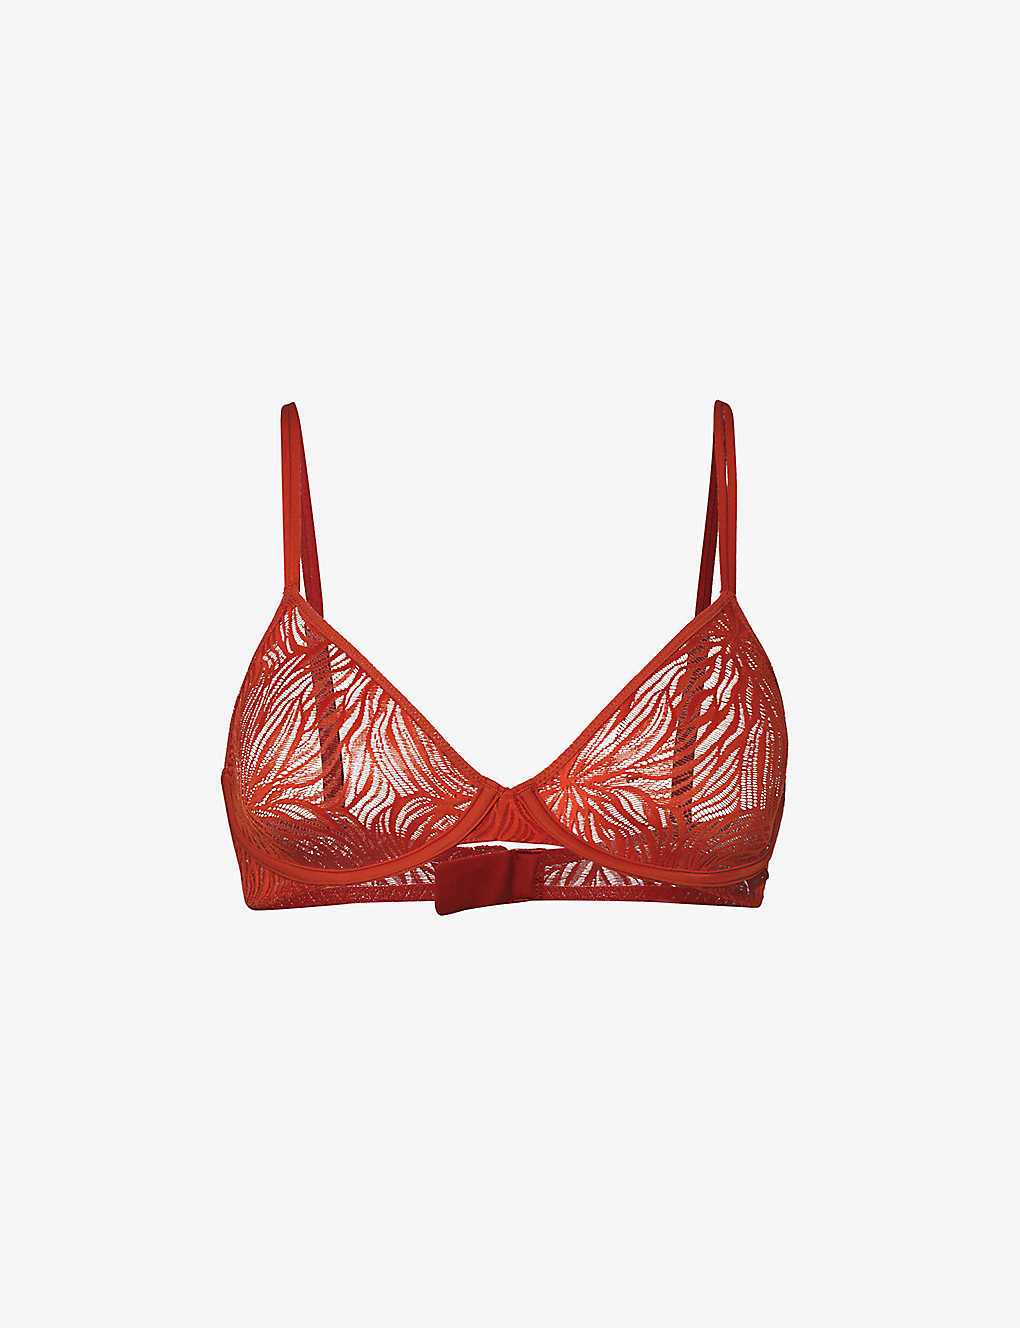 Calvin Klein Womens Jazzberry Jam Sheer Marquisette Floral-lace Stretch-woven Soft-cup Bra